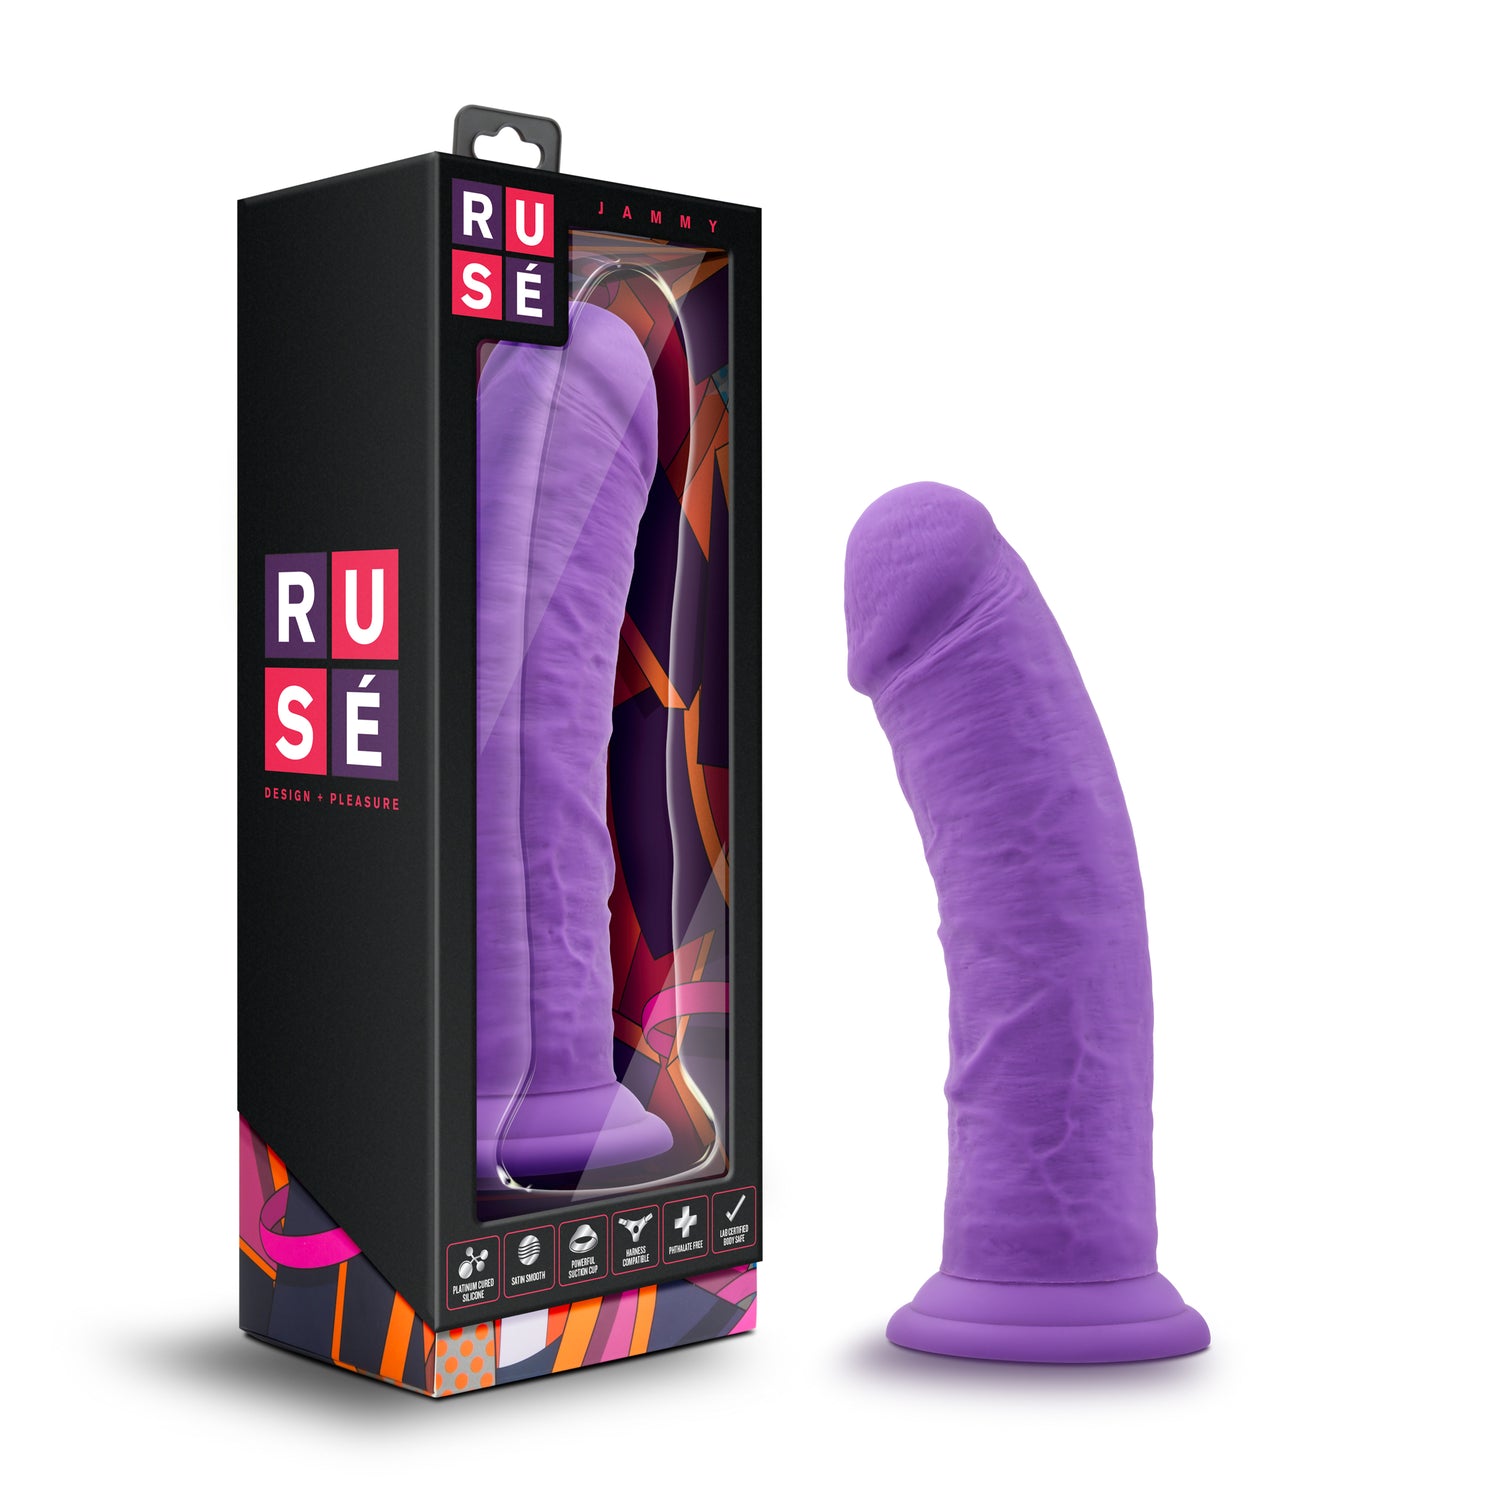 Ruse Jammy Purple - Just for you desires